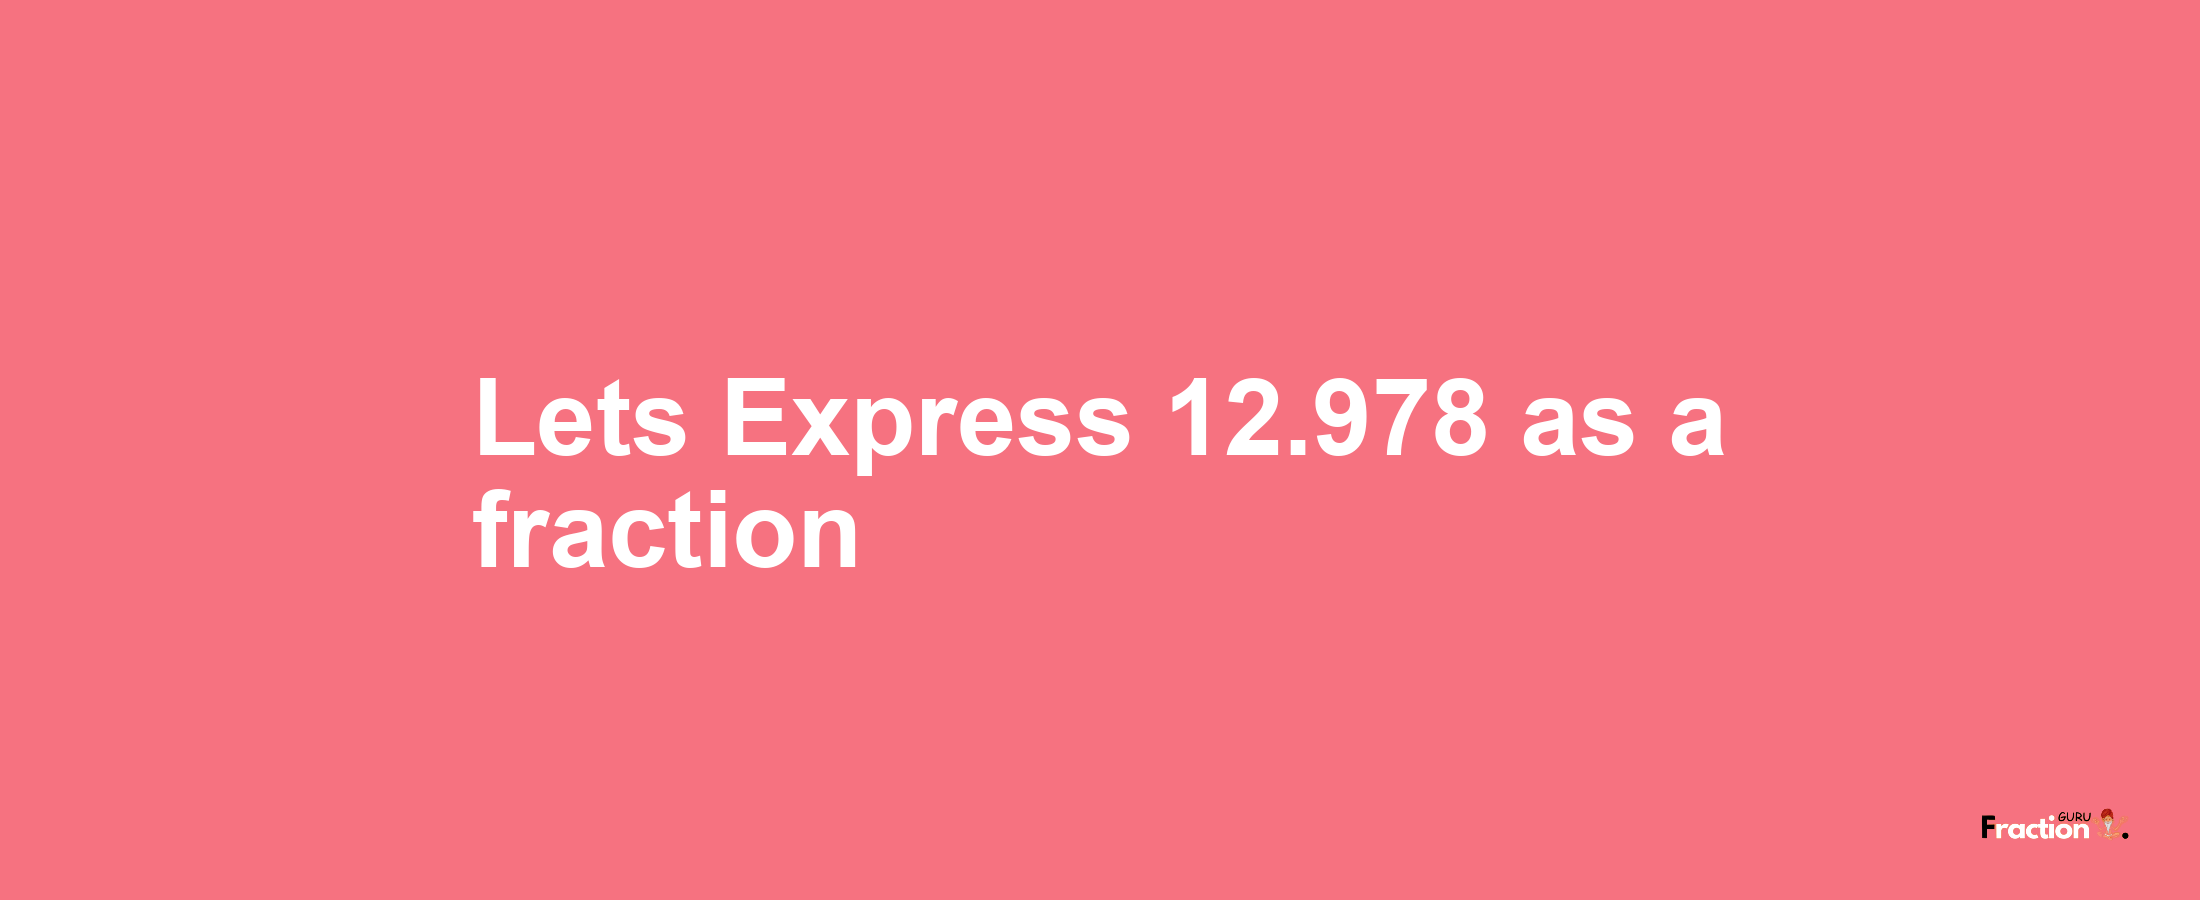 Lets Express 12.978 as afraction